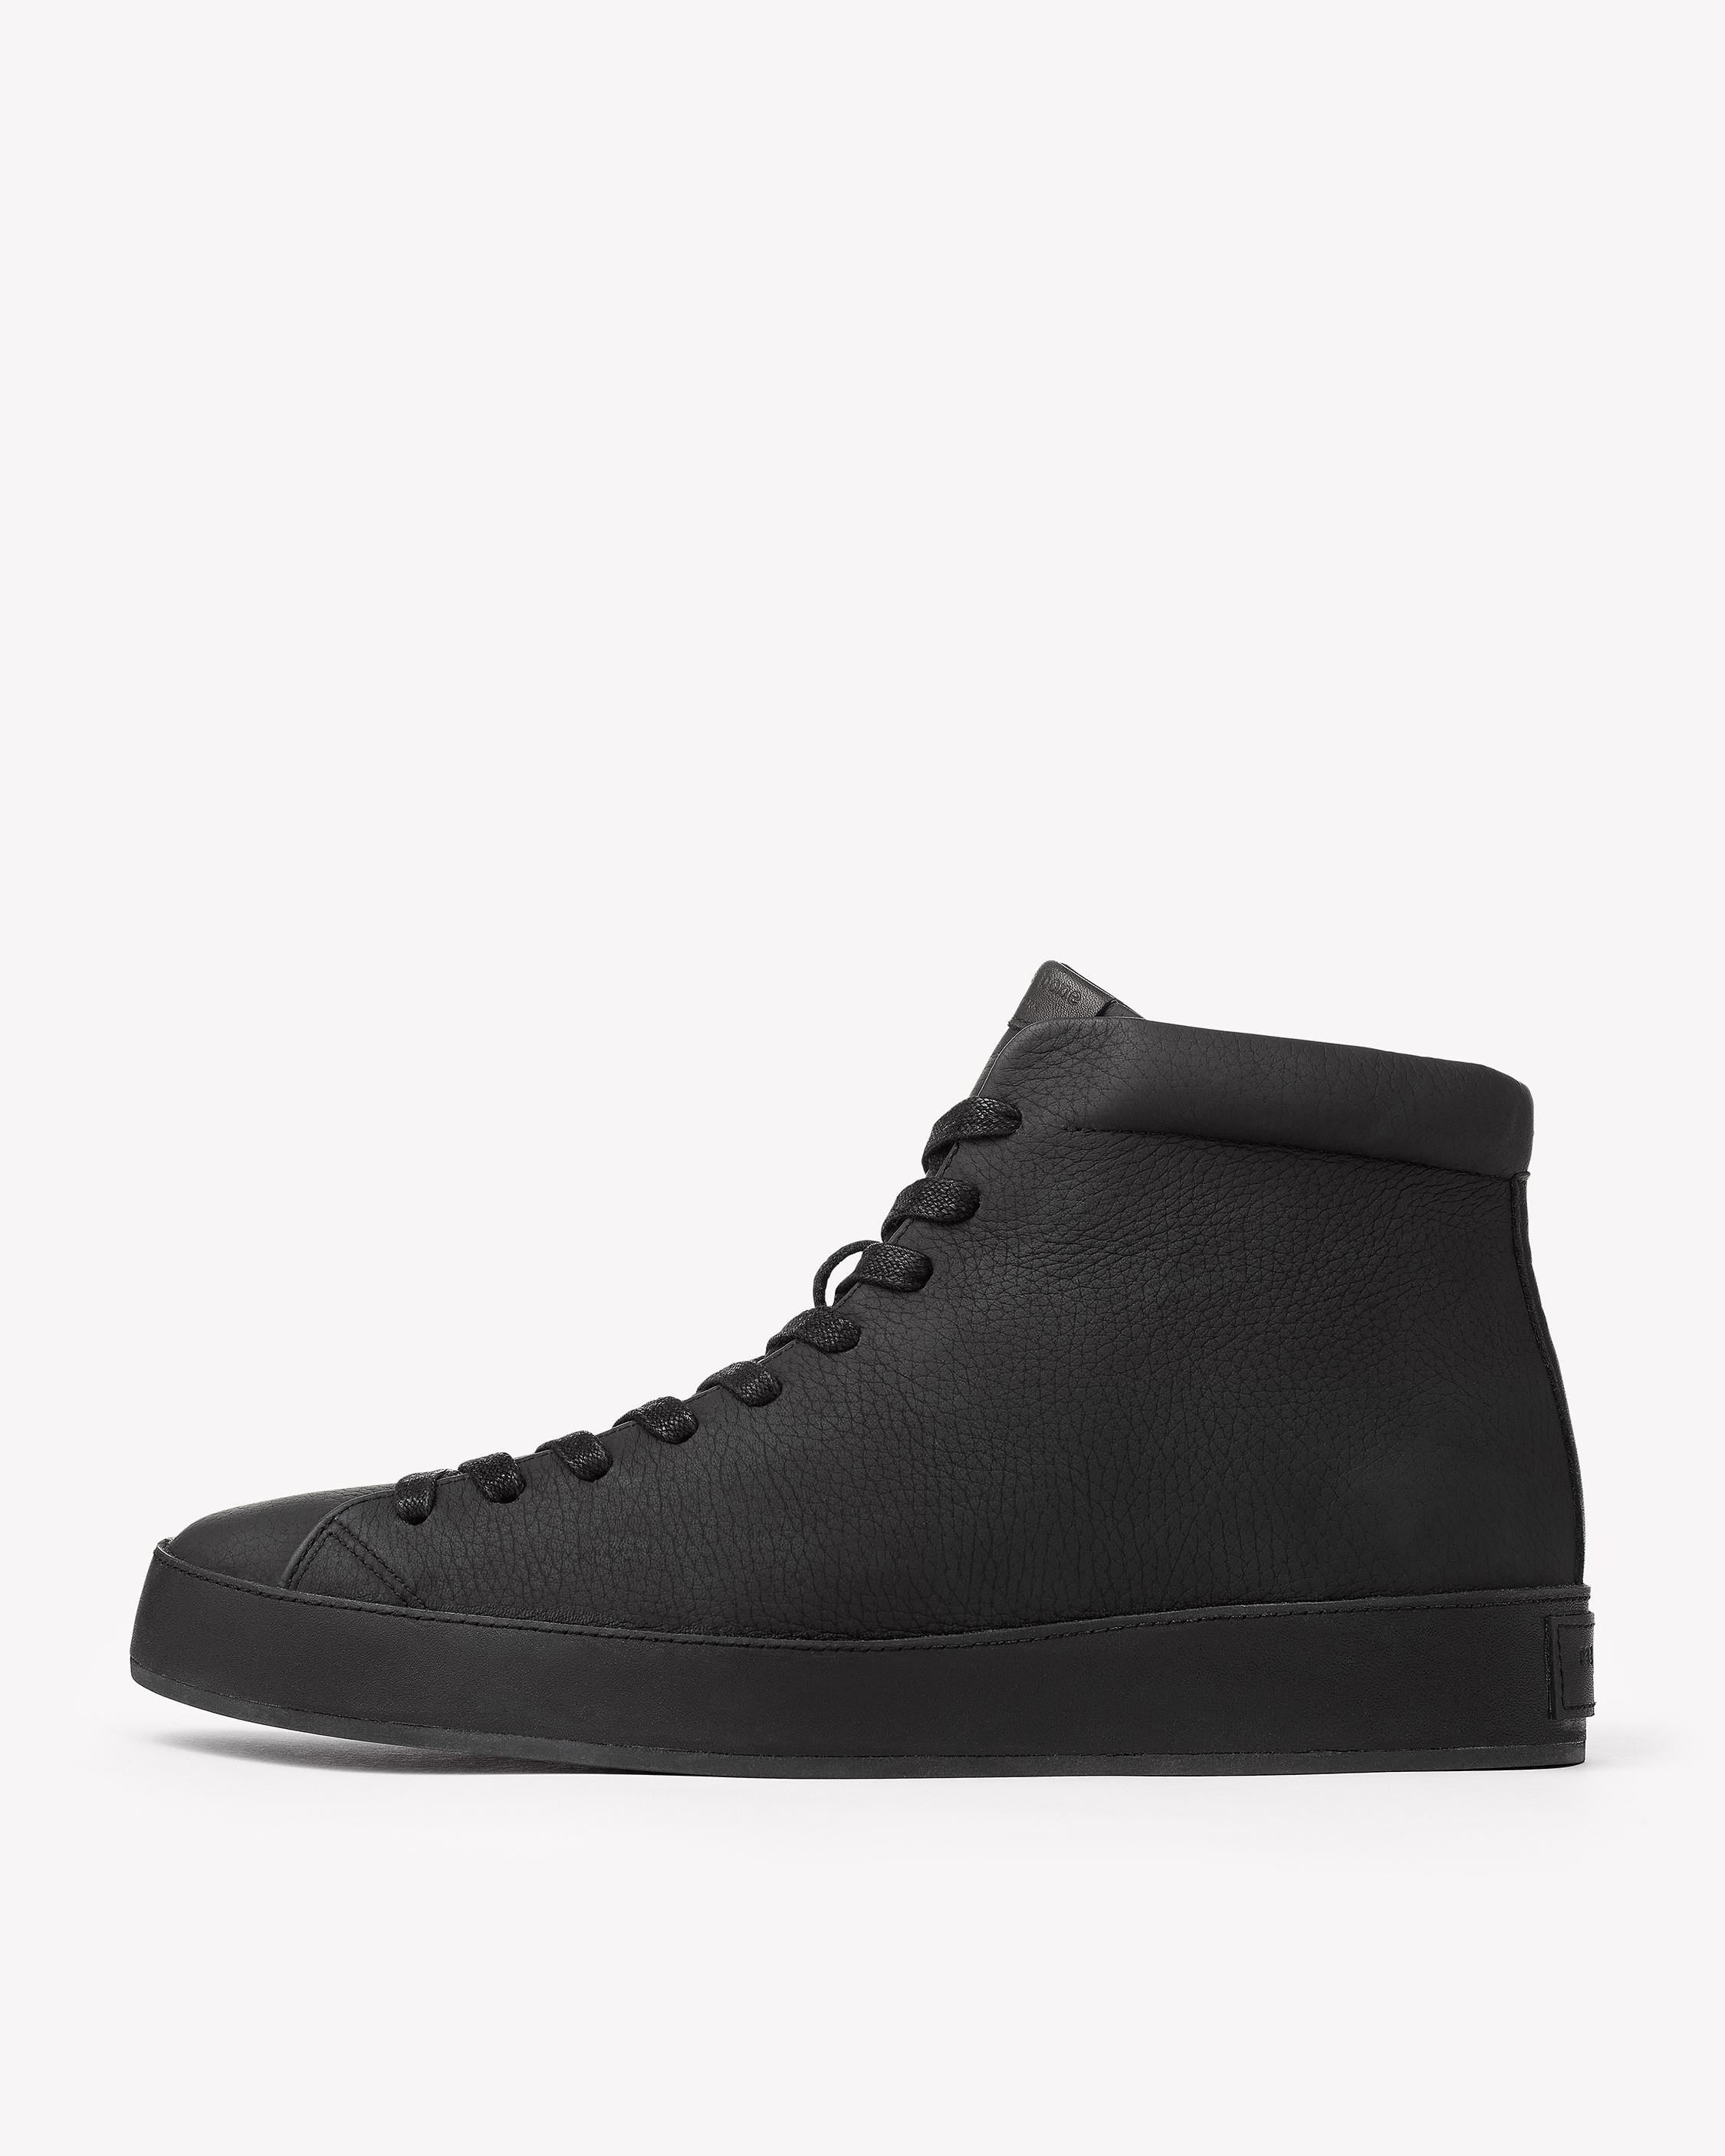 Men's Designer Shoes: Boots to Loafers to Sneakers in Leather, Suede ...